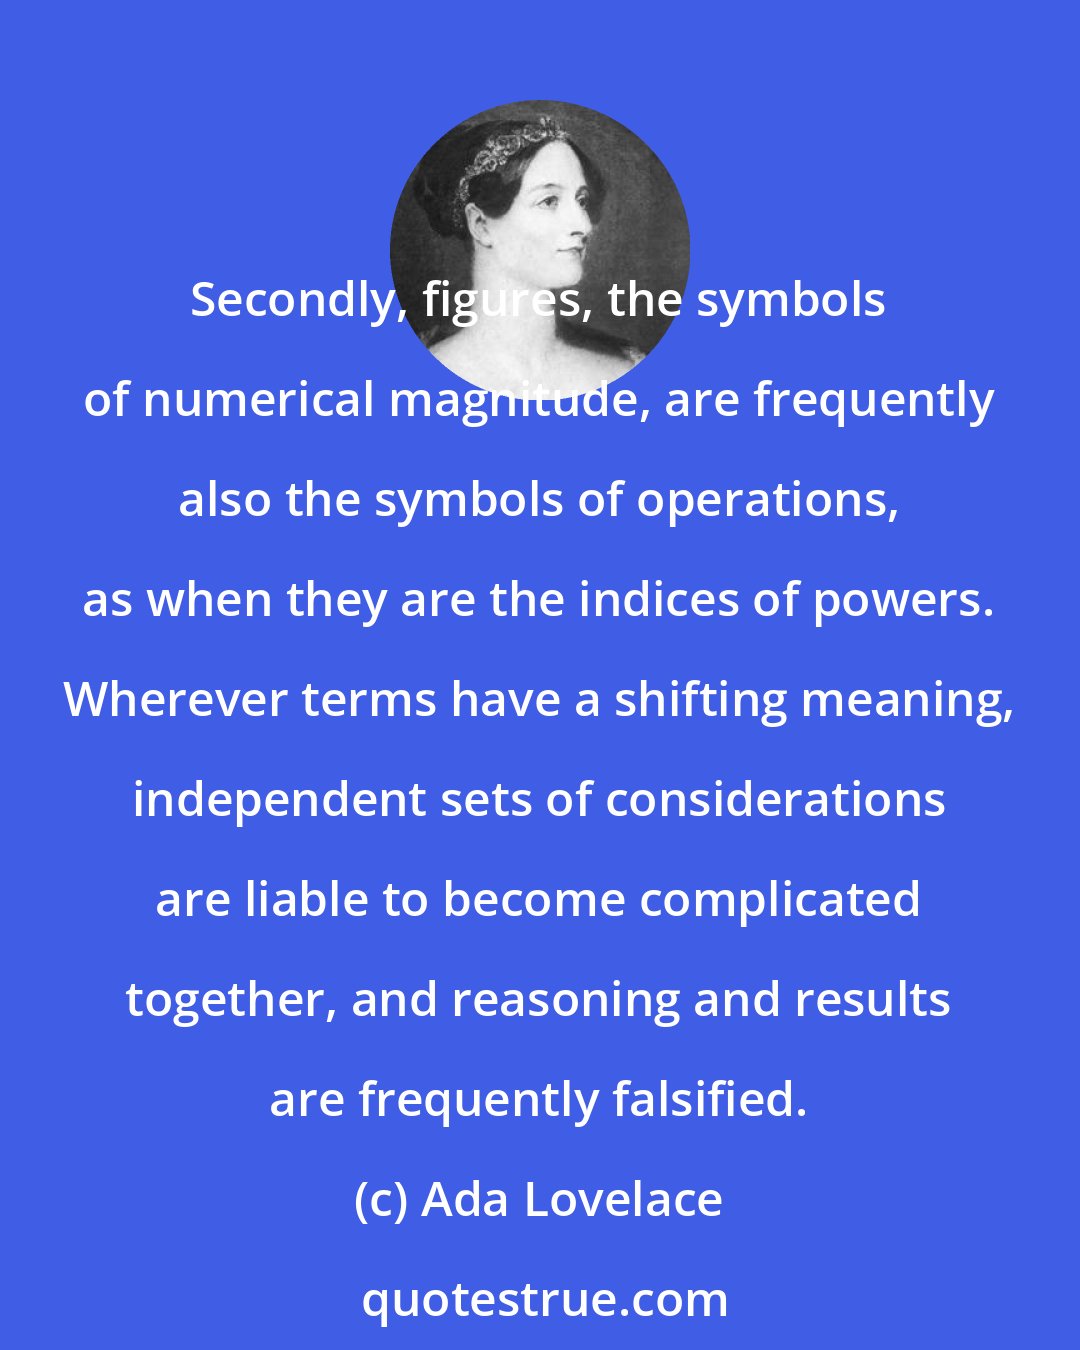 Ada Lovelace: Secondly, figures, the symbols of numerical magnitude, are frequently also the symbols of operations, as when they are the indices of powers. Wherever terms have a shifting meaning, independent sets of considerations are liable to become complicated together, and reasoning and results are frequently falsified.